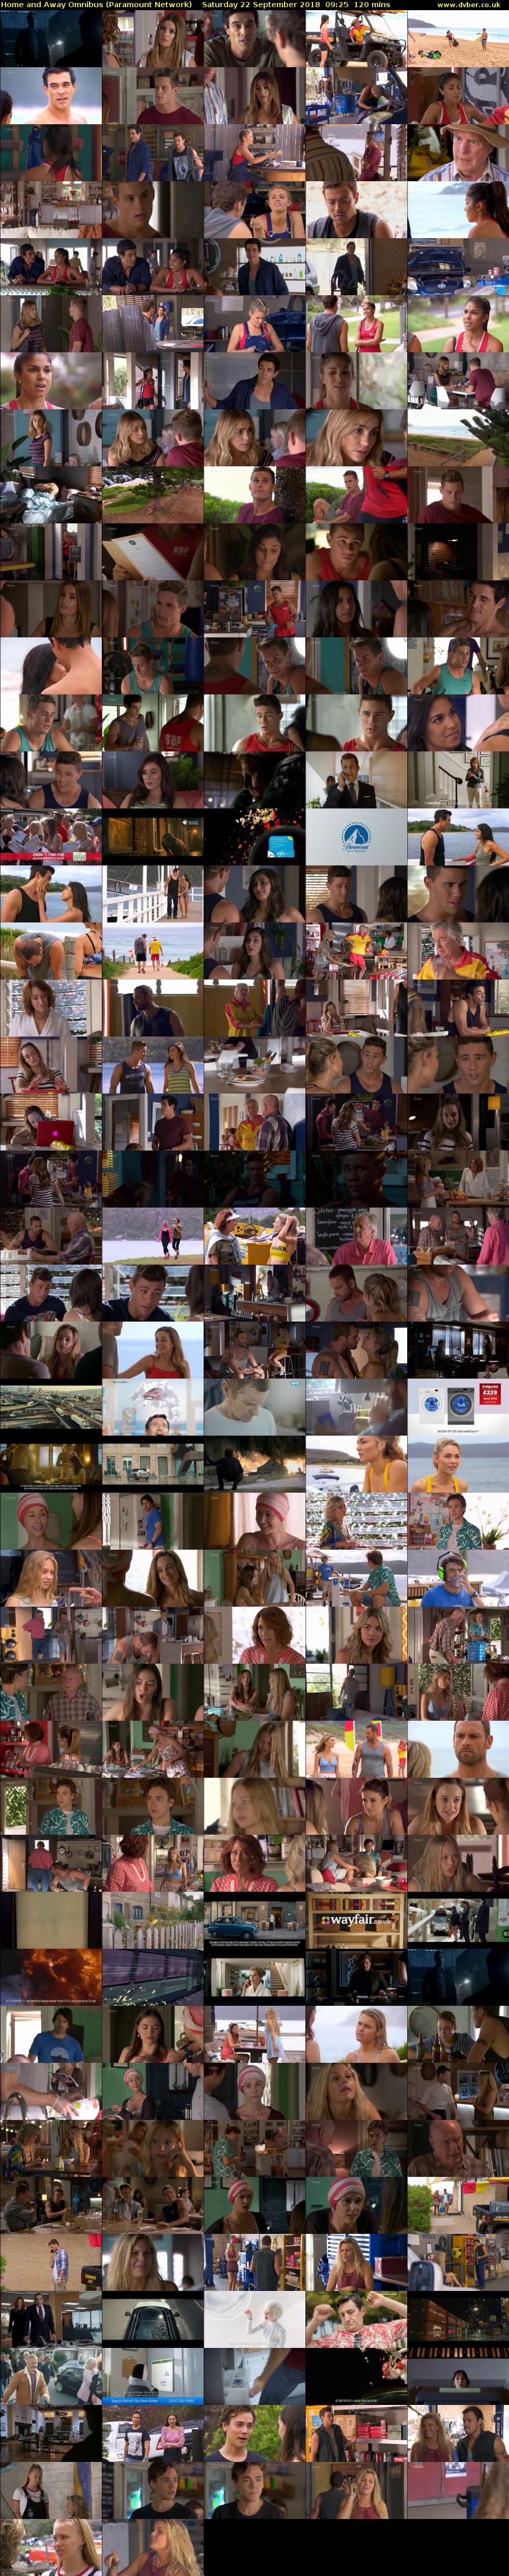 Home and Away Omnibus (Paramount Network) Saturday 22 September 2018 09:25 - 11:25